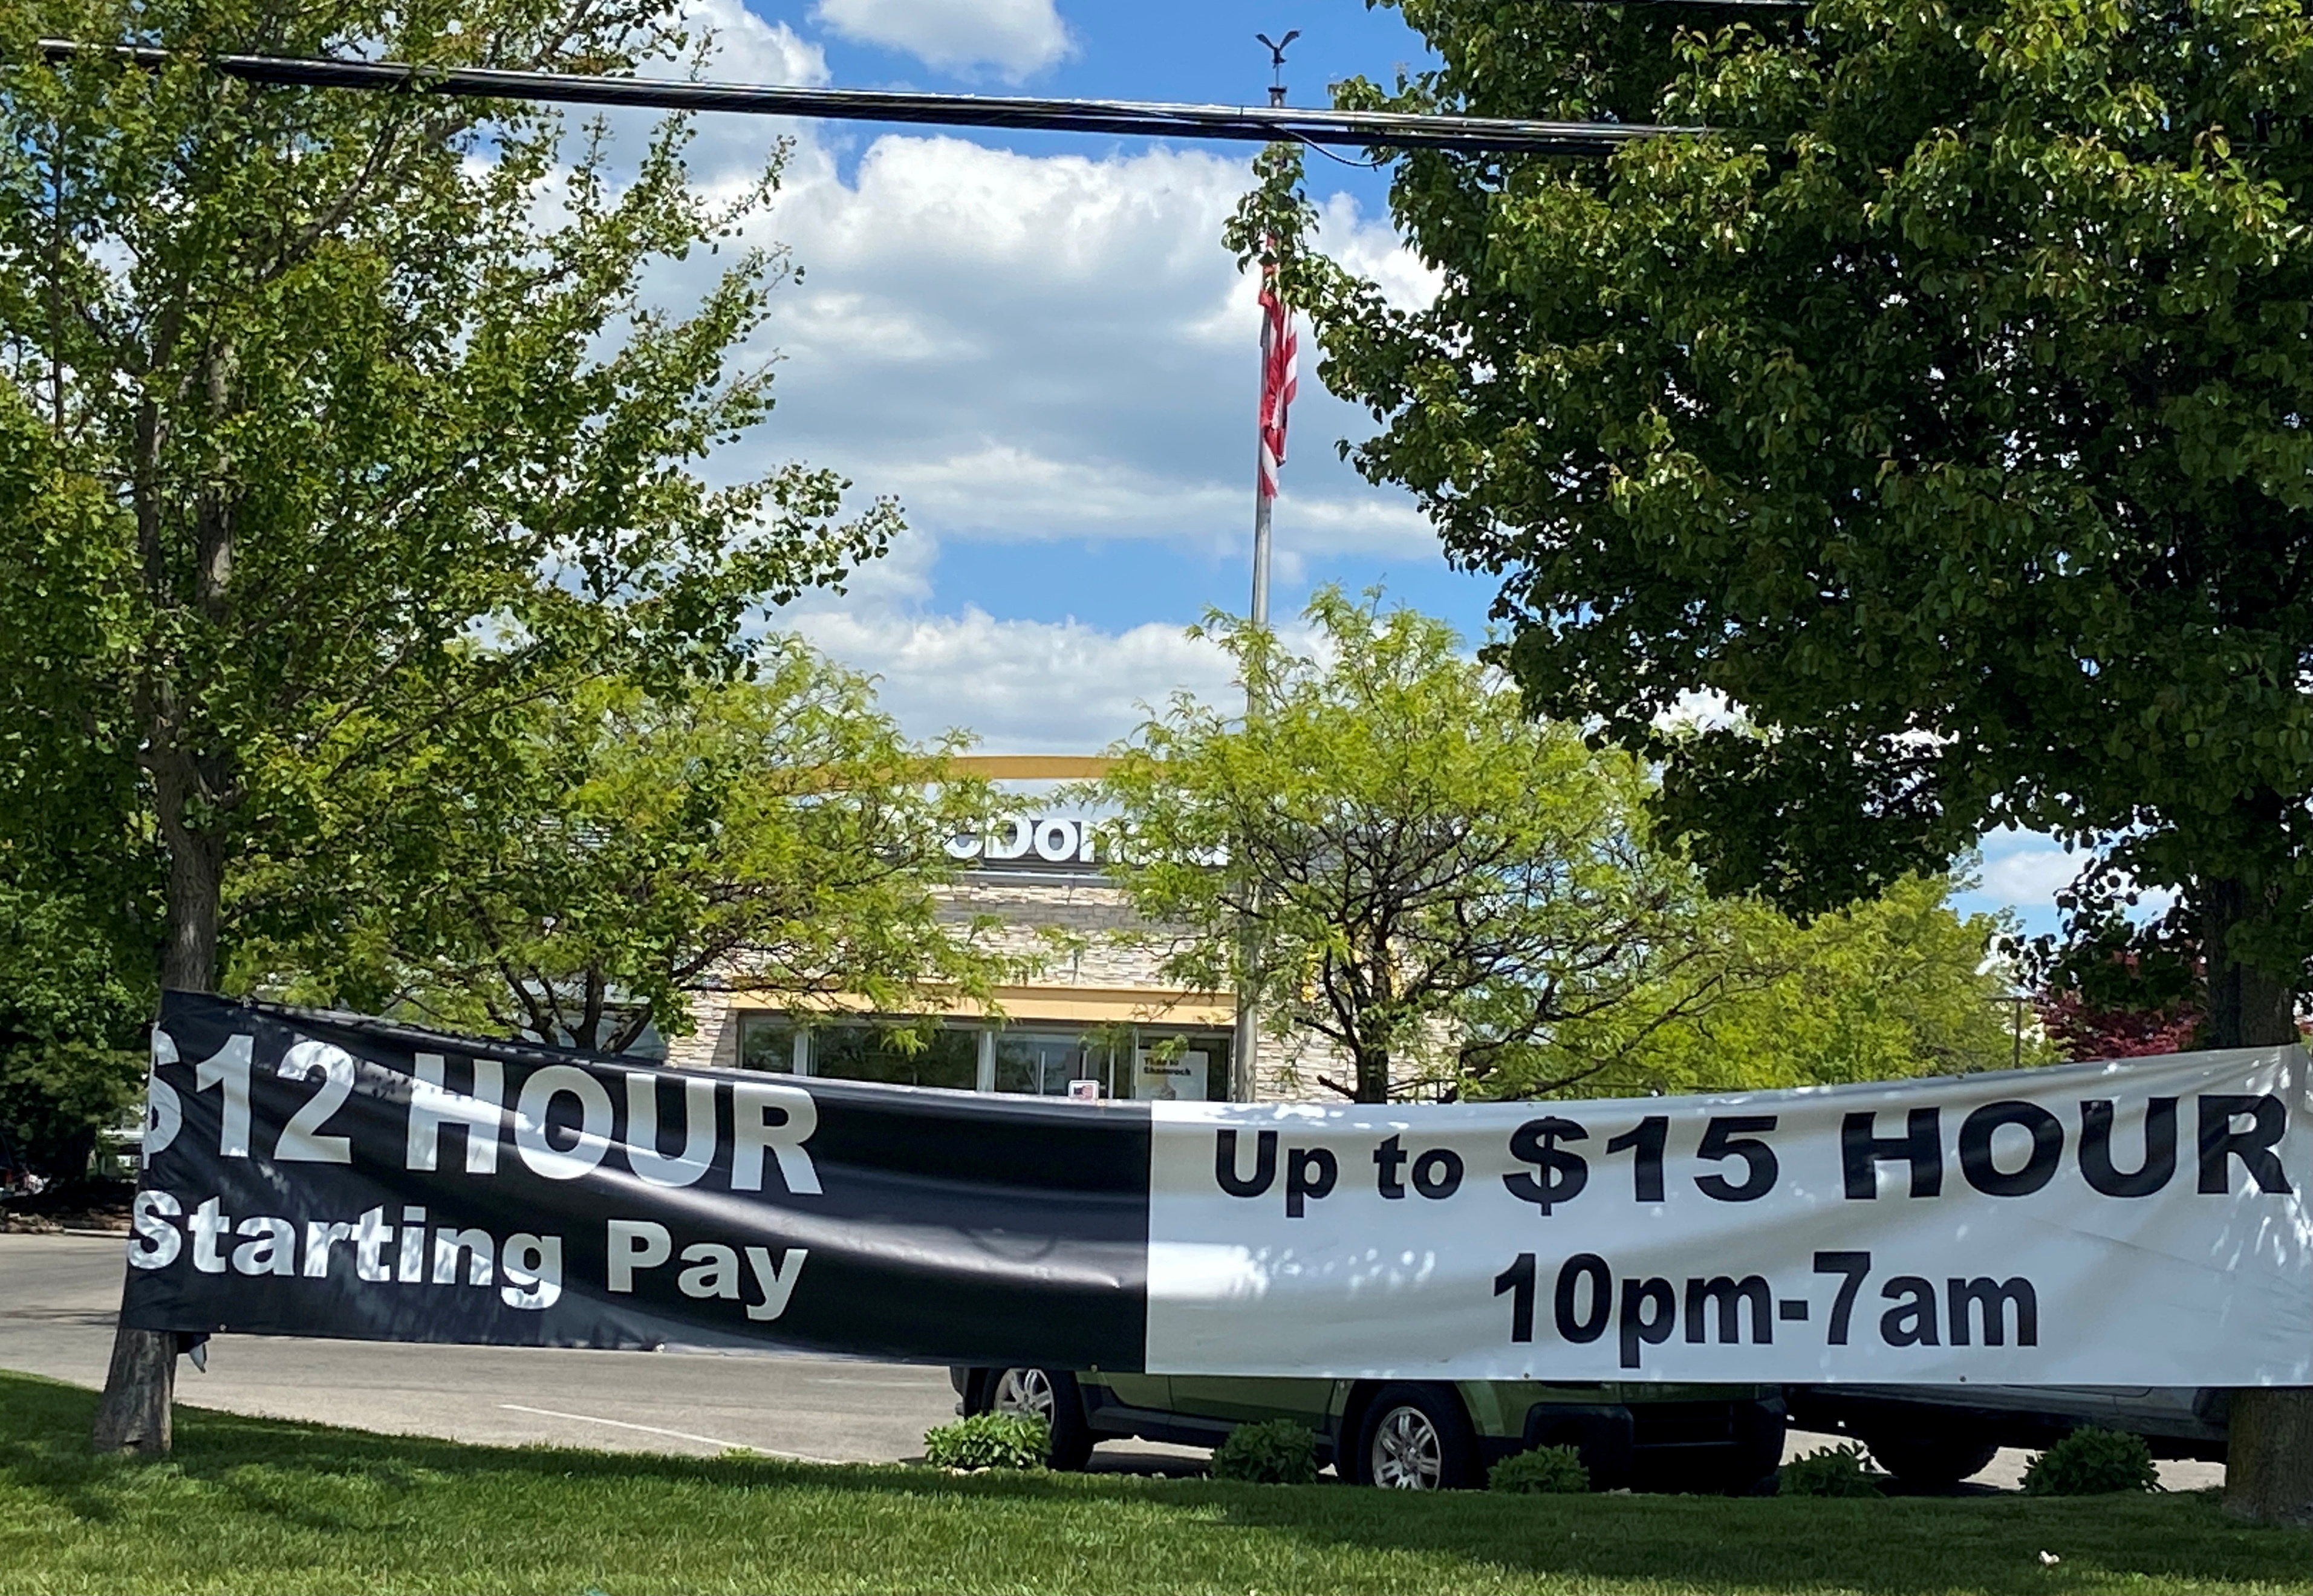 A banner inviting people to apply for open jobs is seen outside a McDonald's restaurant in Bloomington